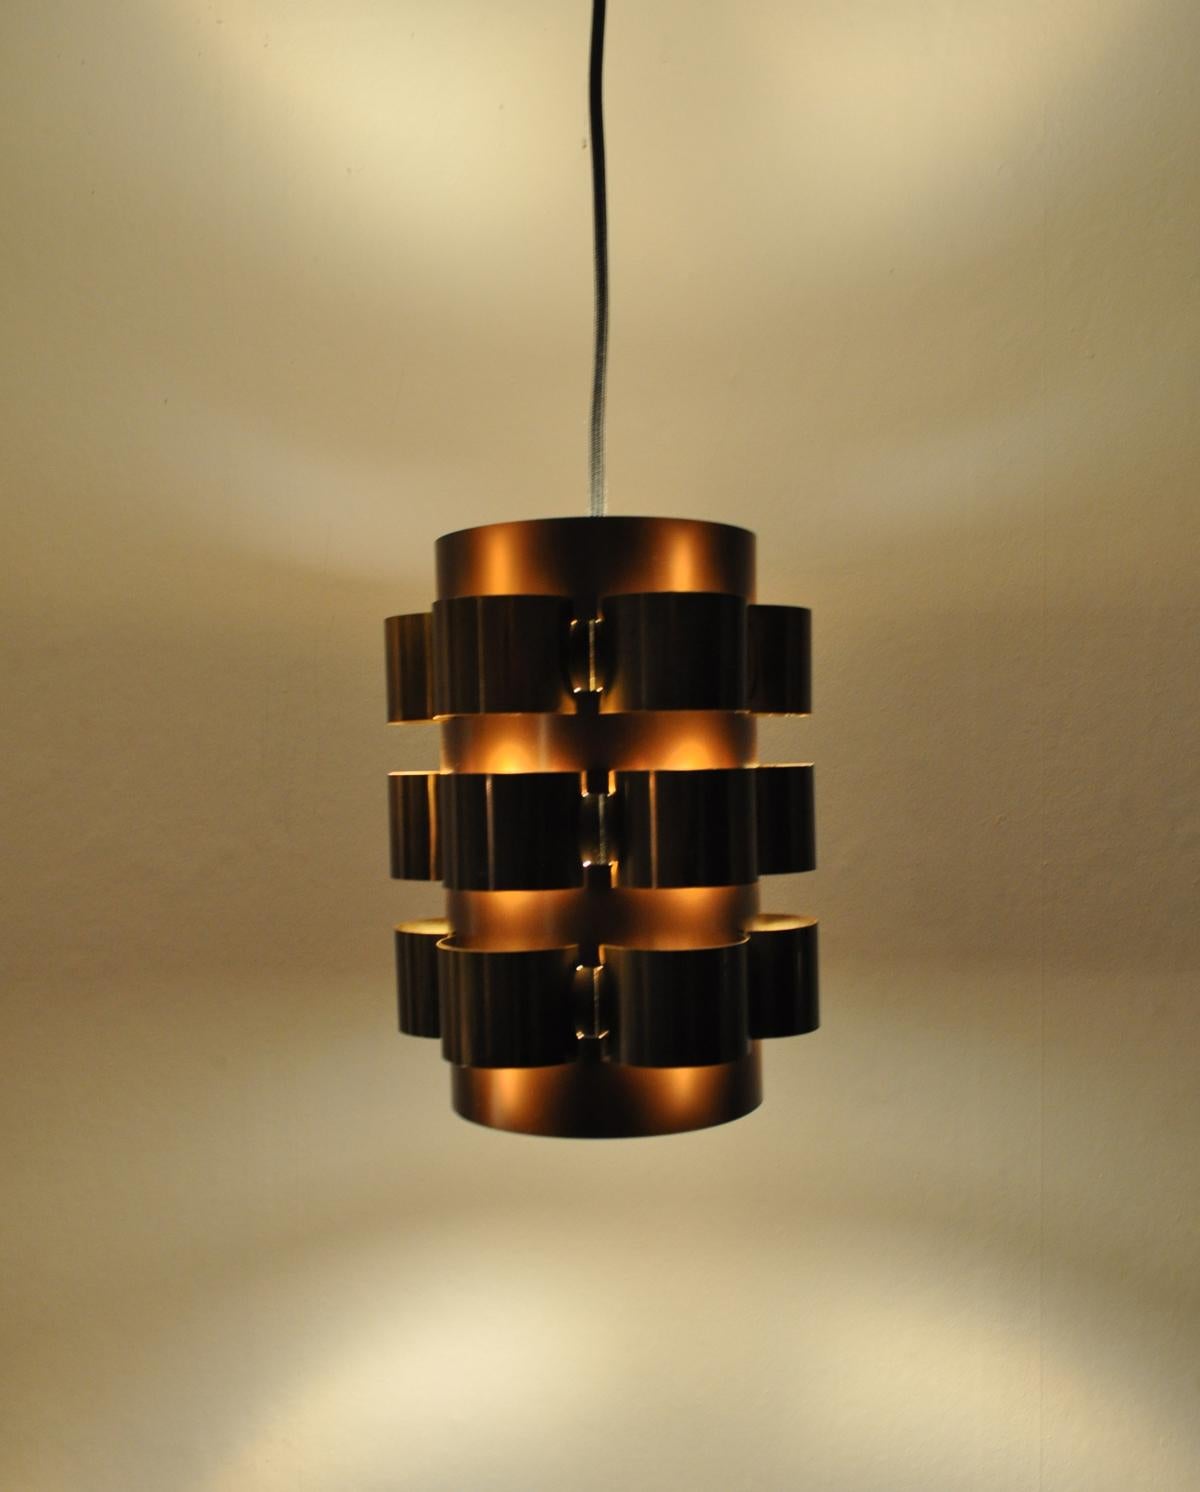 Danish Lamp with Patinated Brass Elements, Design by Werner Schou for Coronell 1